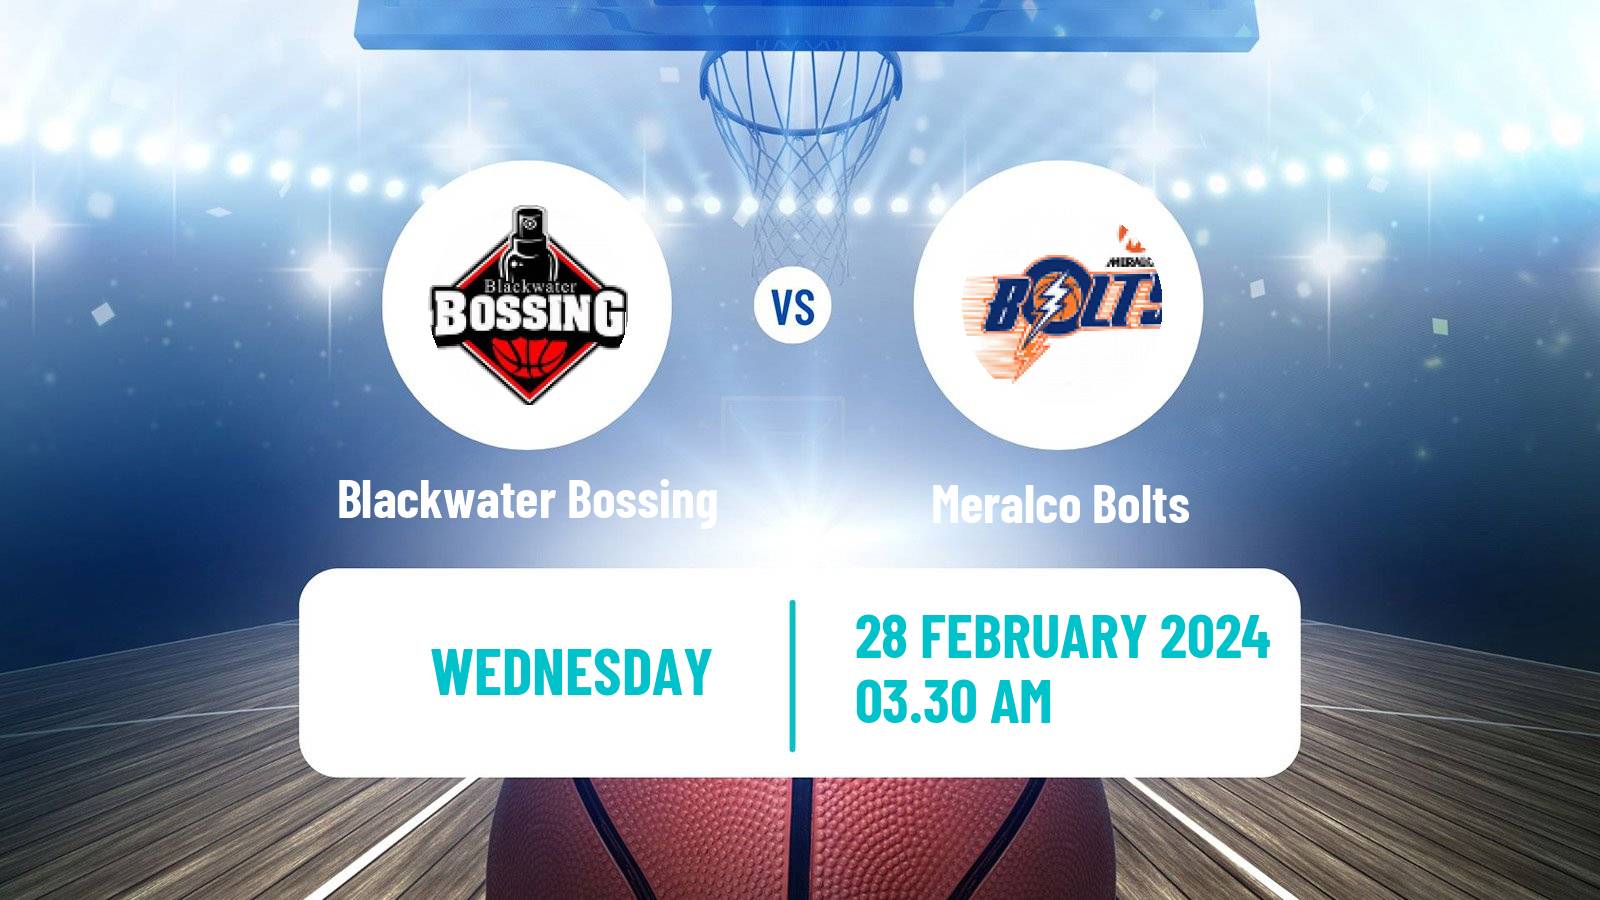 Basketball Philippines Cup Blackwater Bossing - Meralco Bolts